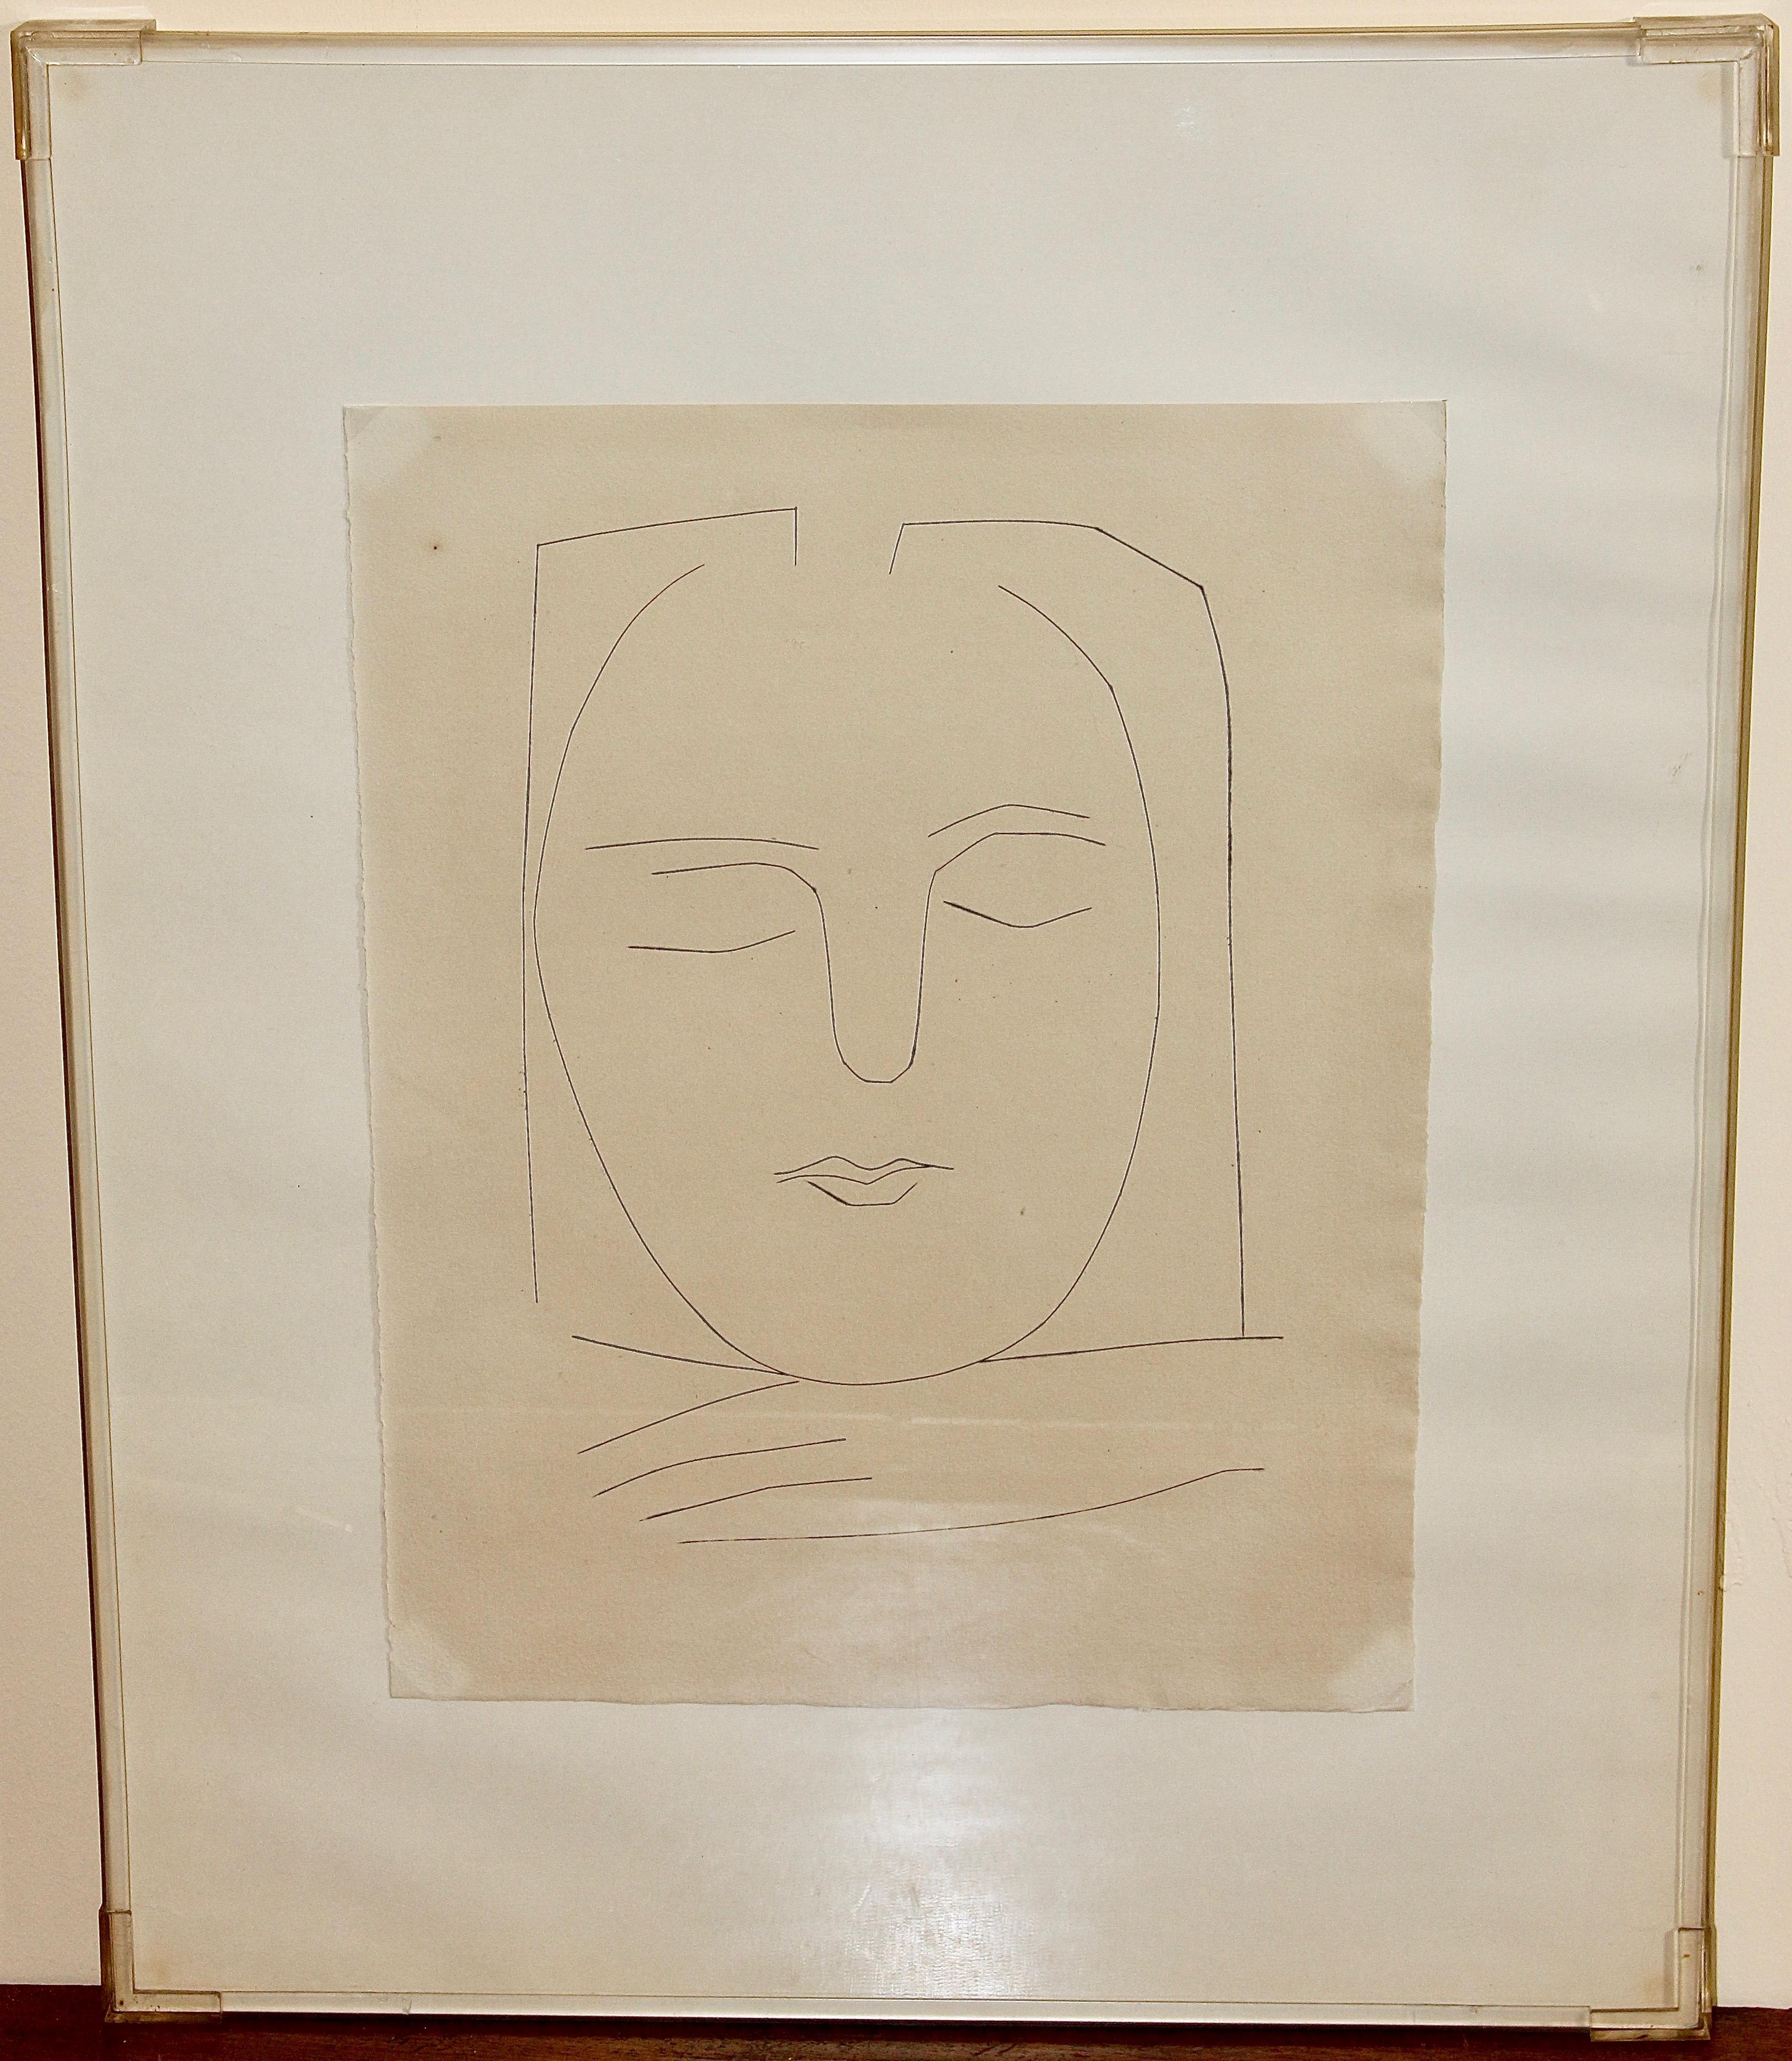 picasso etching price